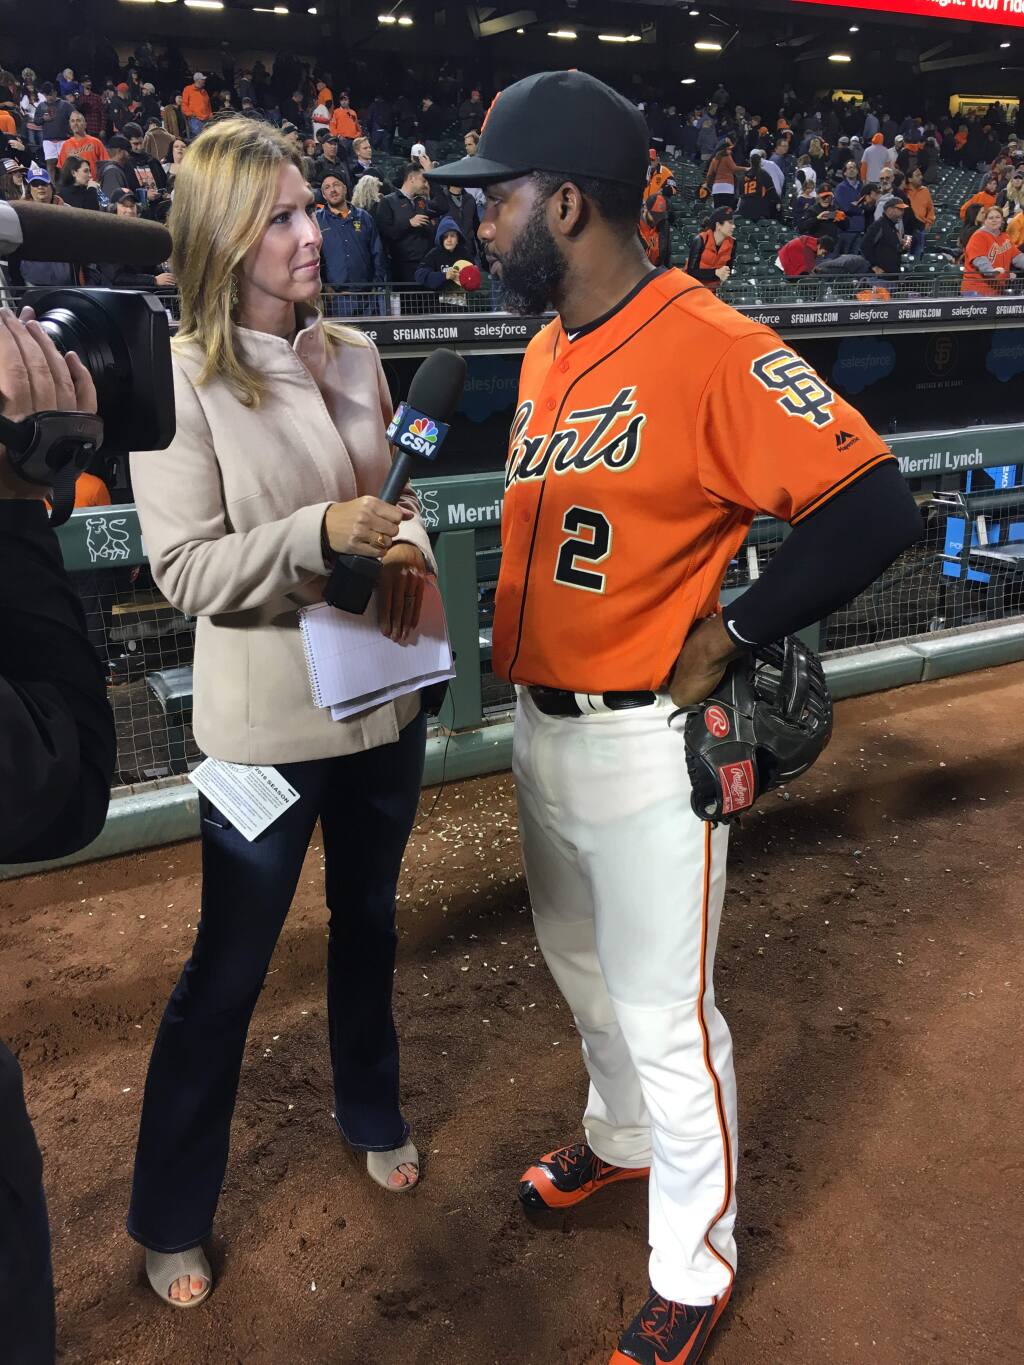 Petaluma native Amy Gutierrez, known as 'Amy G' with the Giants, interviews Giants centerfielder Denard Span in a 'Hero of the Game' after a game in 2016 at AT&T Park. (CAITLYN CRAWFORD)